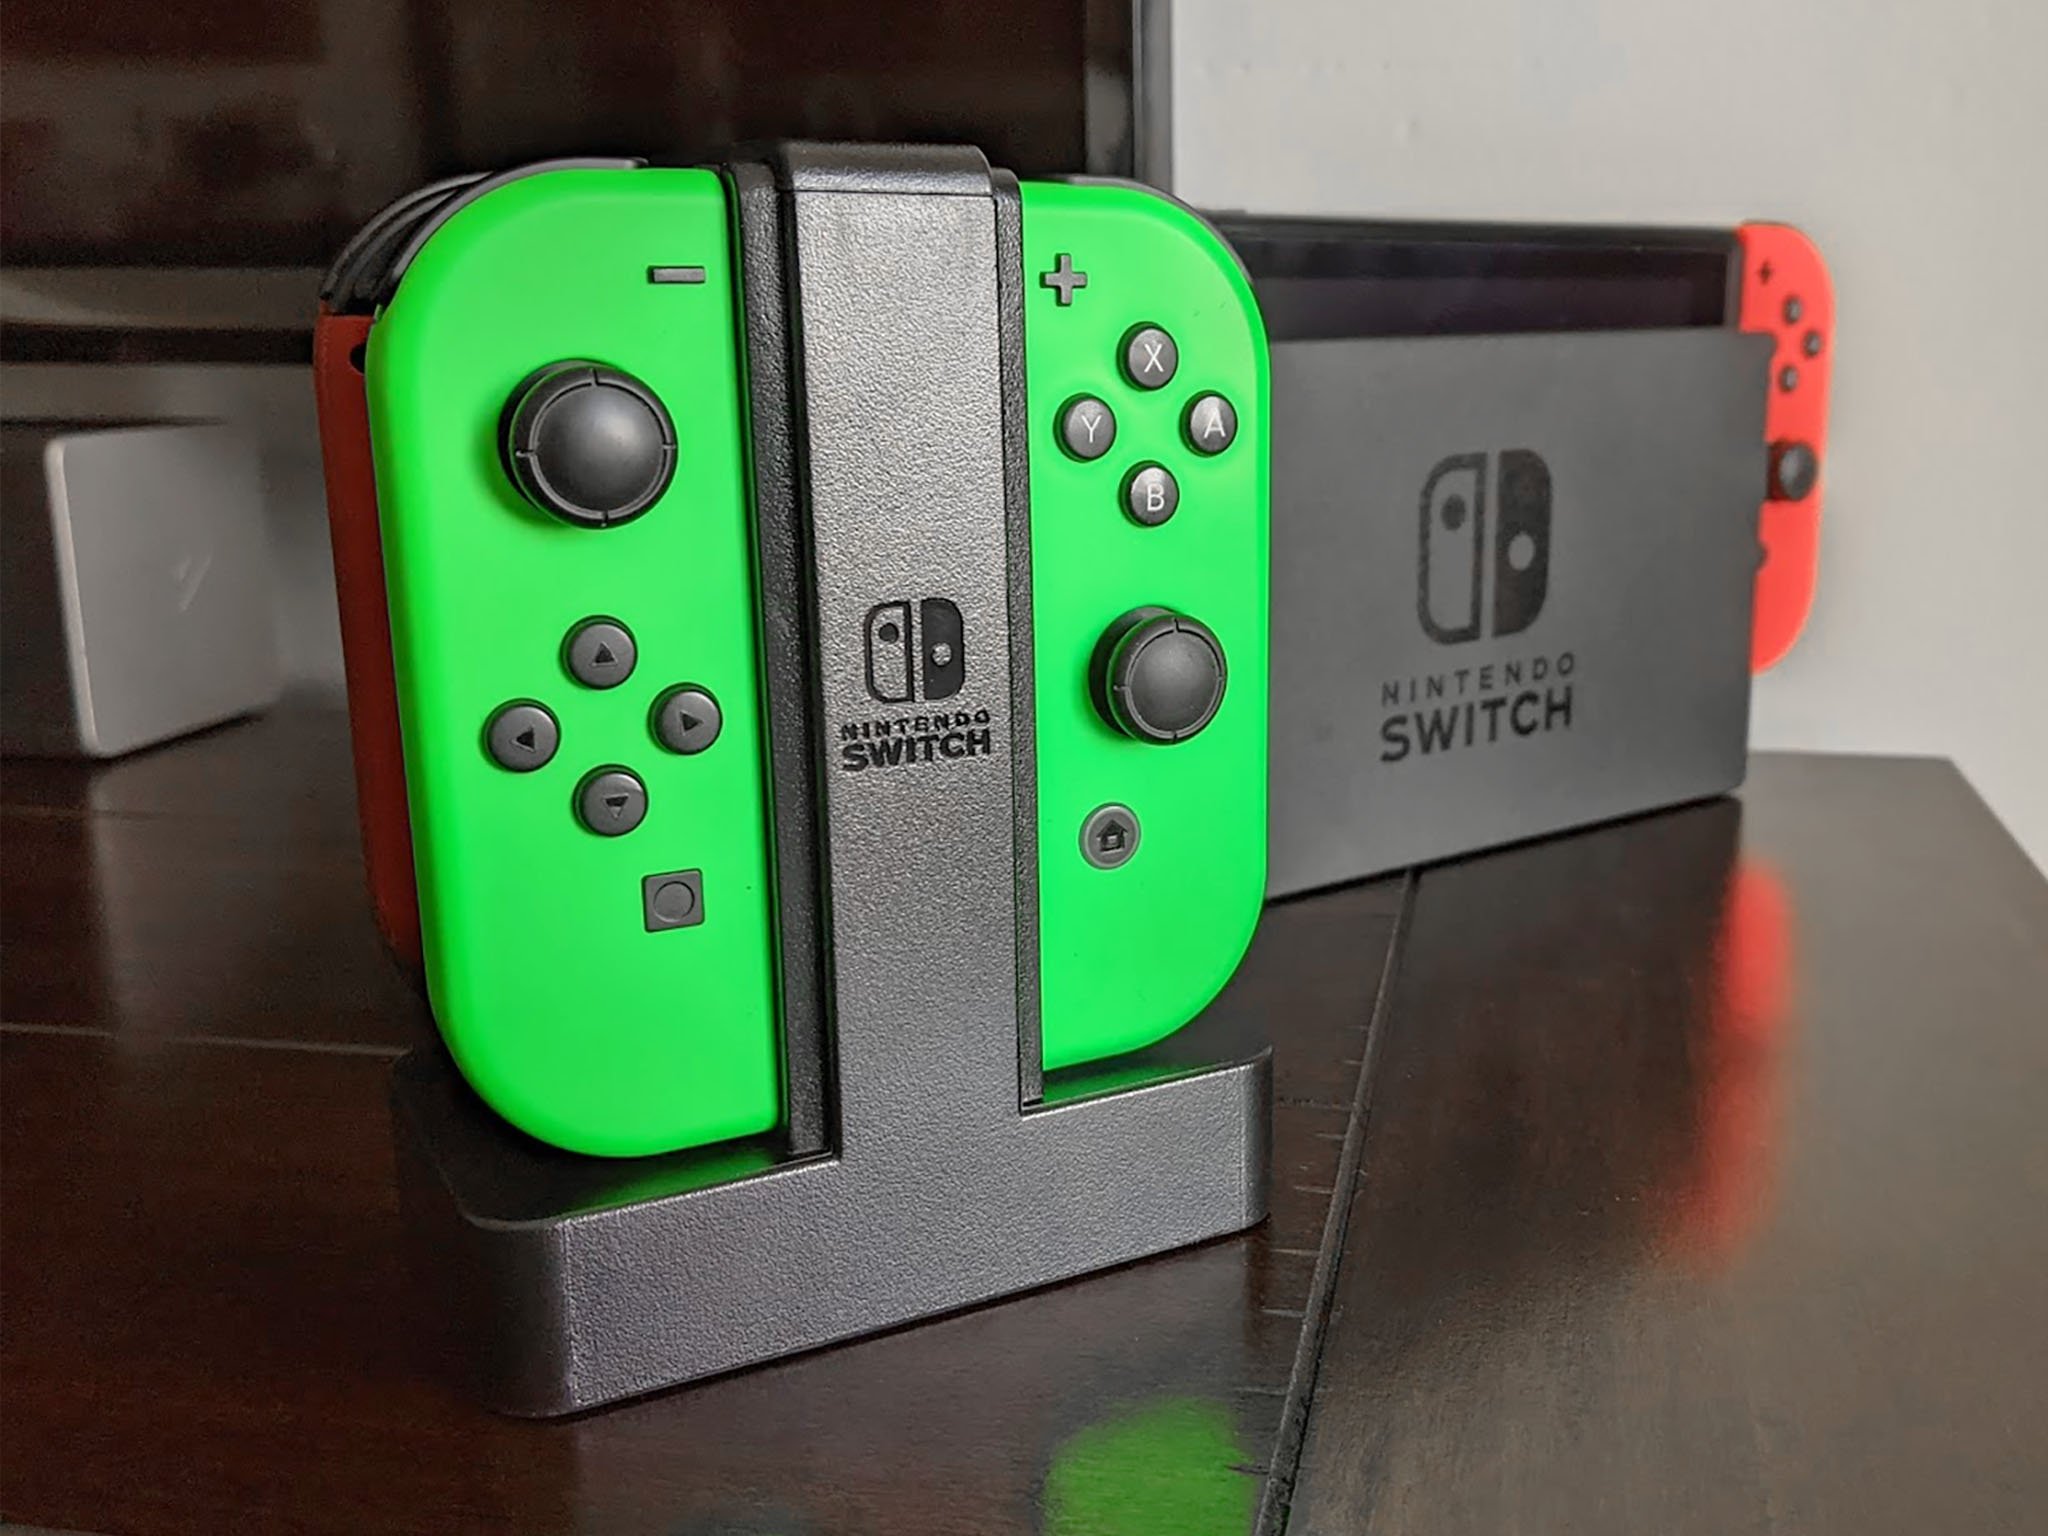 Powera Joycon Charging Dock In Front Of Switch Dock Brightened